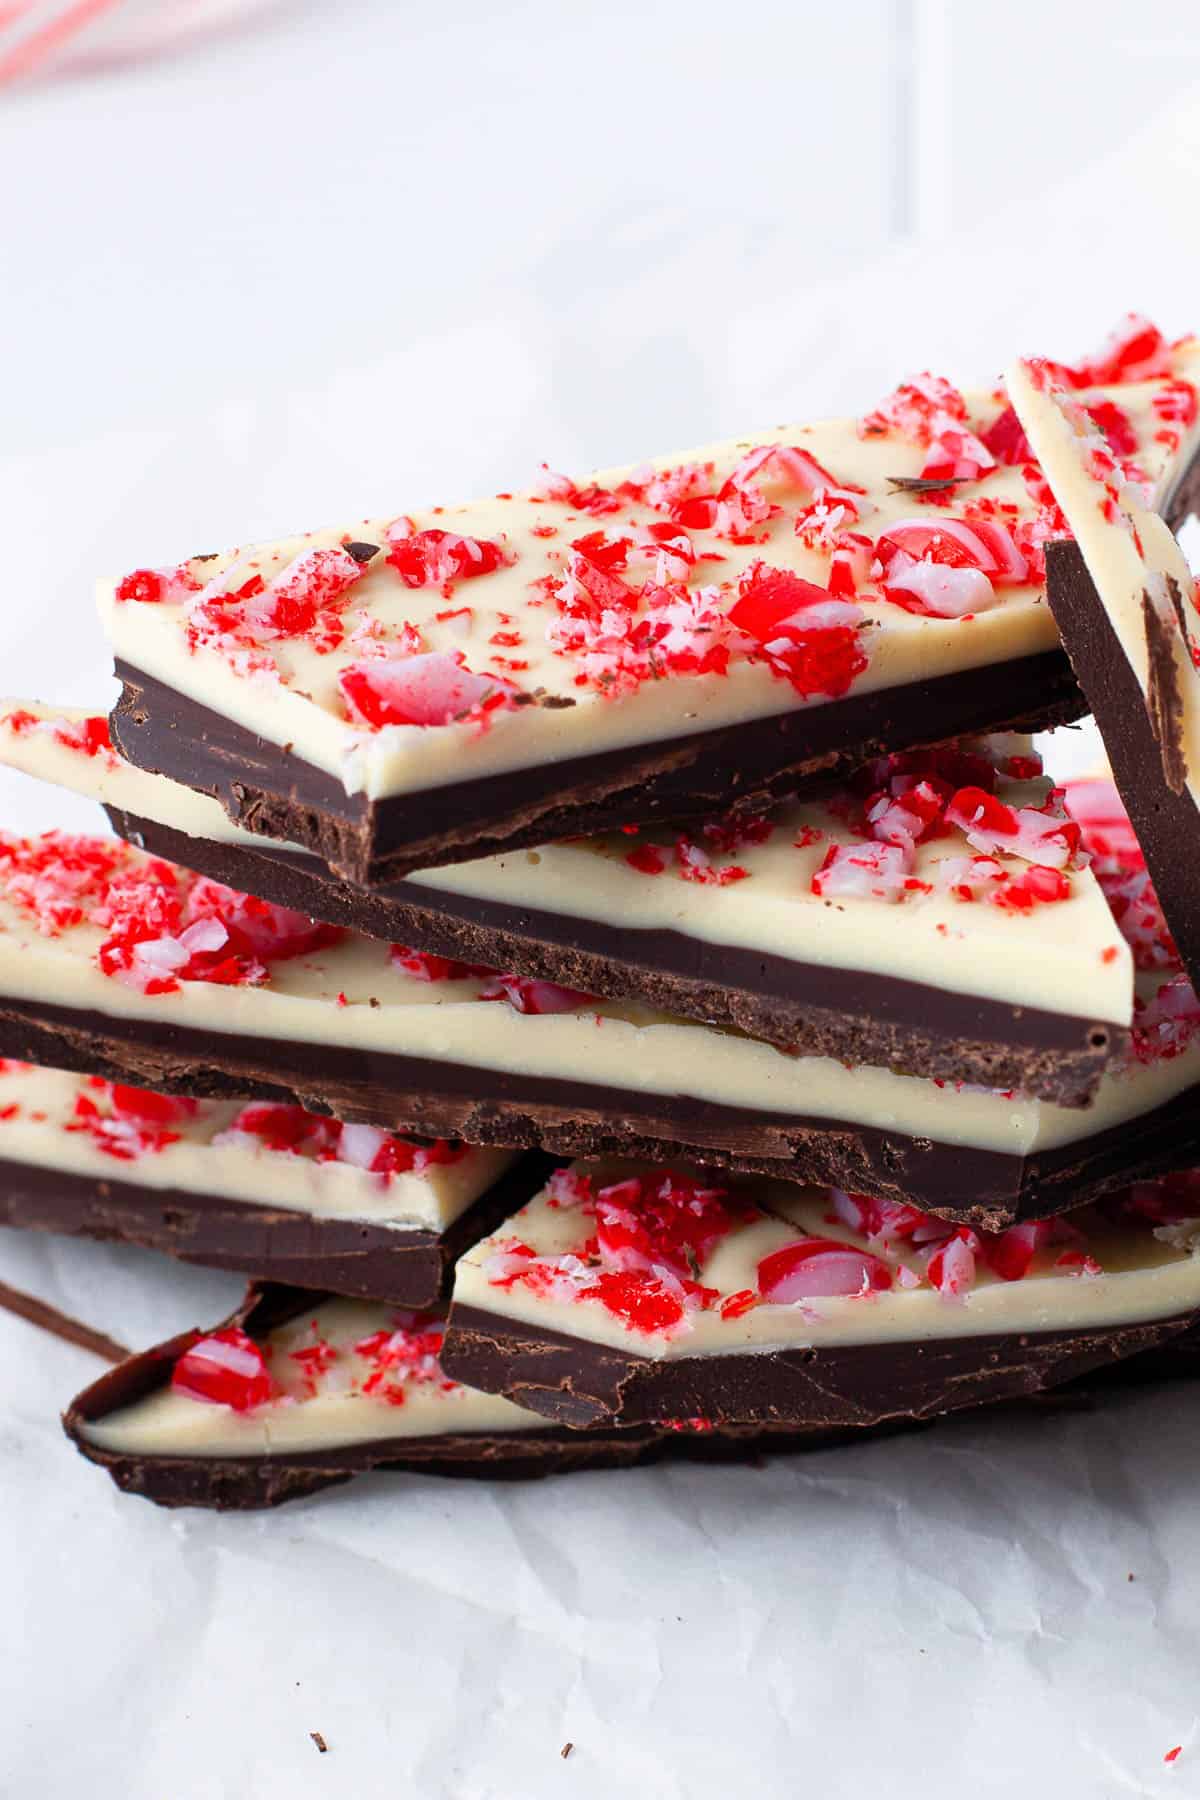 Peppermint bark made with white chocolate and dark chocolate, peppermint candies, broken up and served on white parchment paper.